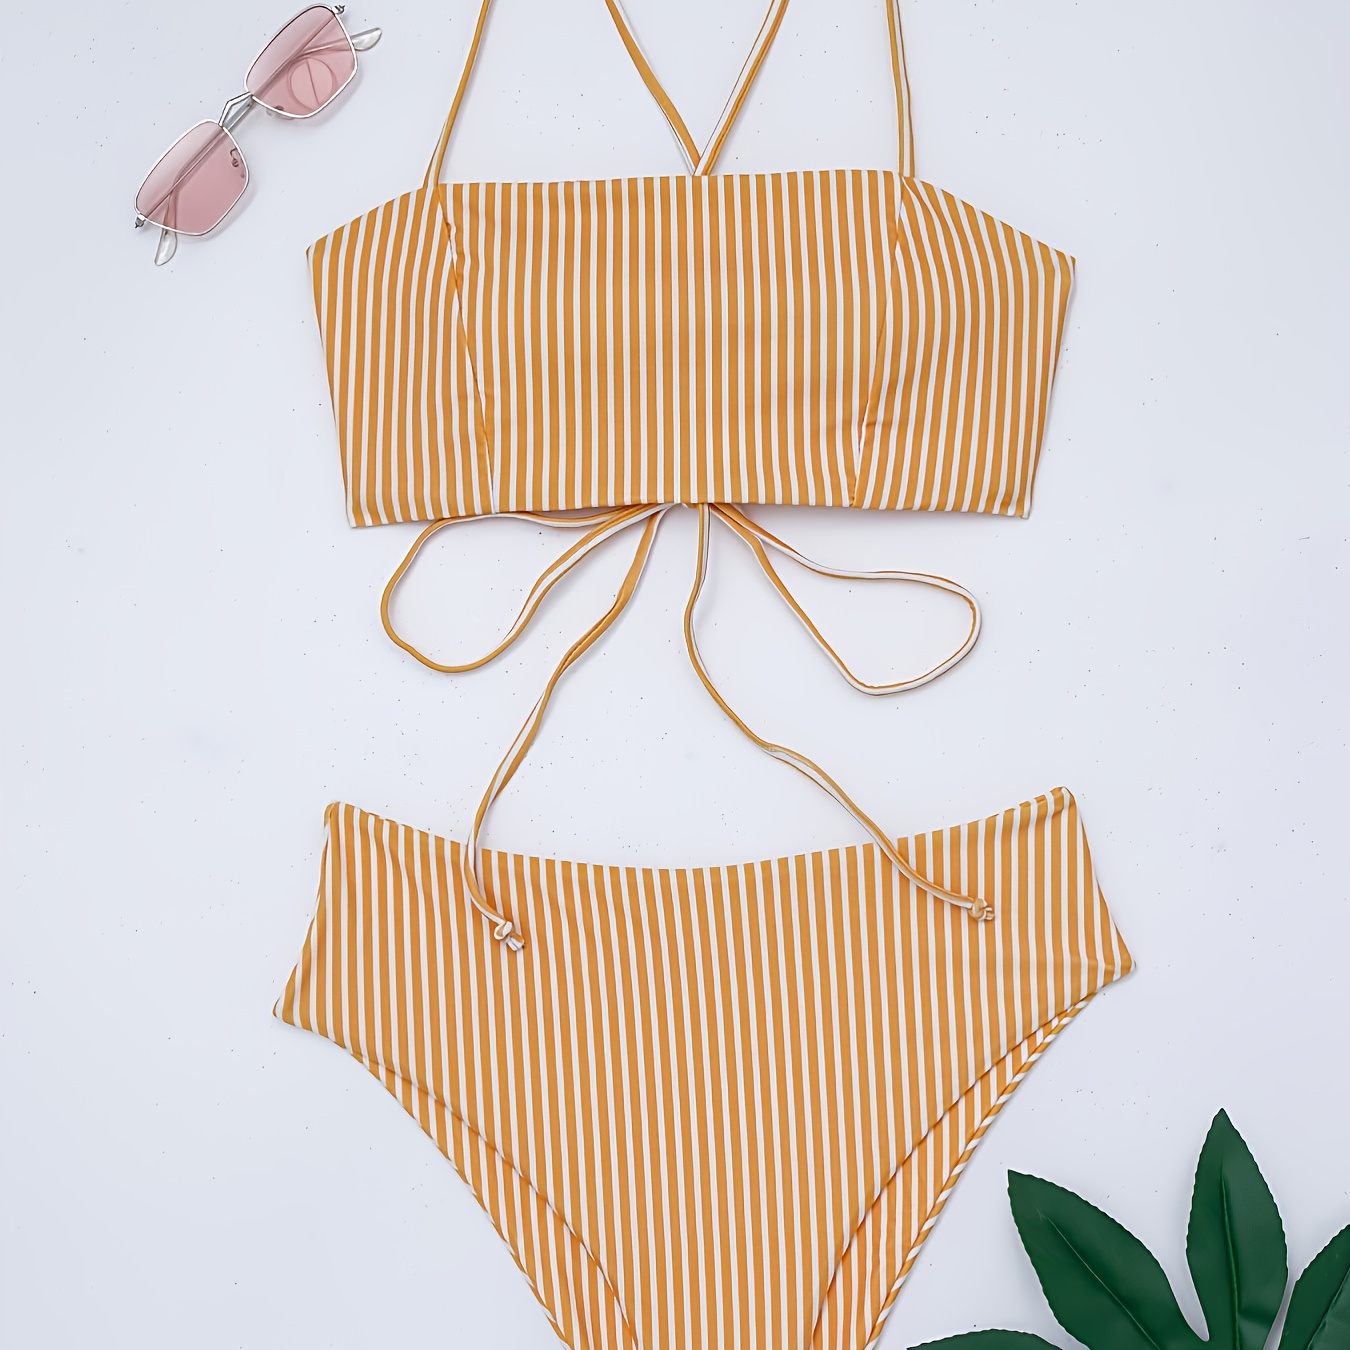 

Striped All Over Print Lace Up Tie Back High Waist High Cut Yellow & White Color 2 Piece Bikini Sets Swimsuit, Women's Swimwear